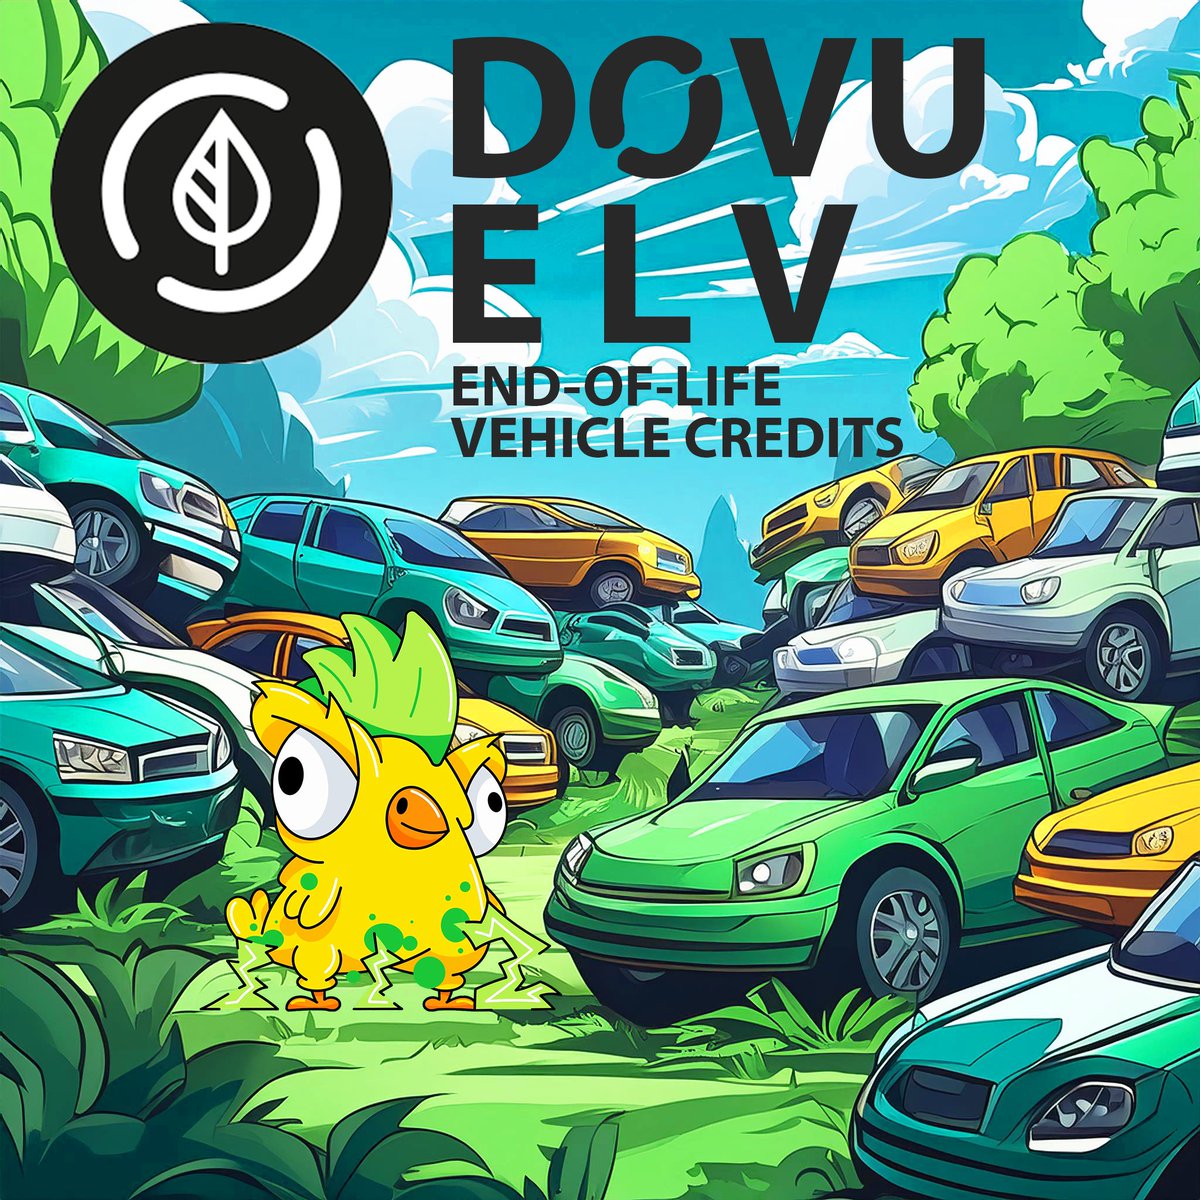 End of Life Vehicle (ELV) Credits are another one of @dovuofficial's innovative sustainable offerings on their platform. Individuals and Organizations can purchase them to offset their Carbon footprint. They provide a tangible way to demonstrate commitment to sustainability